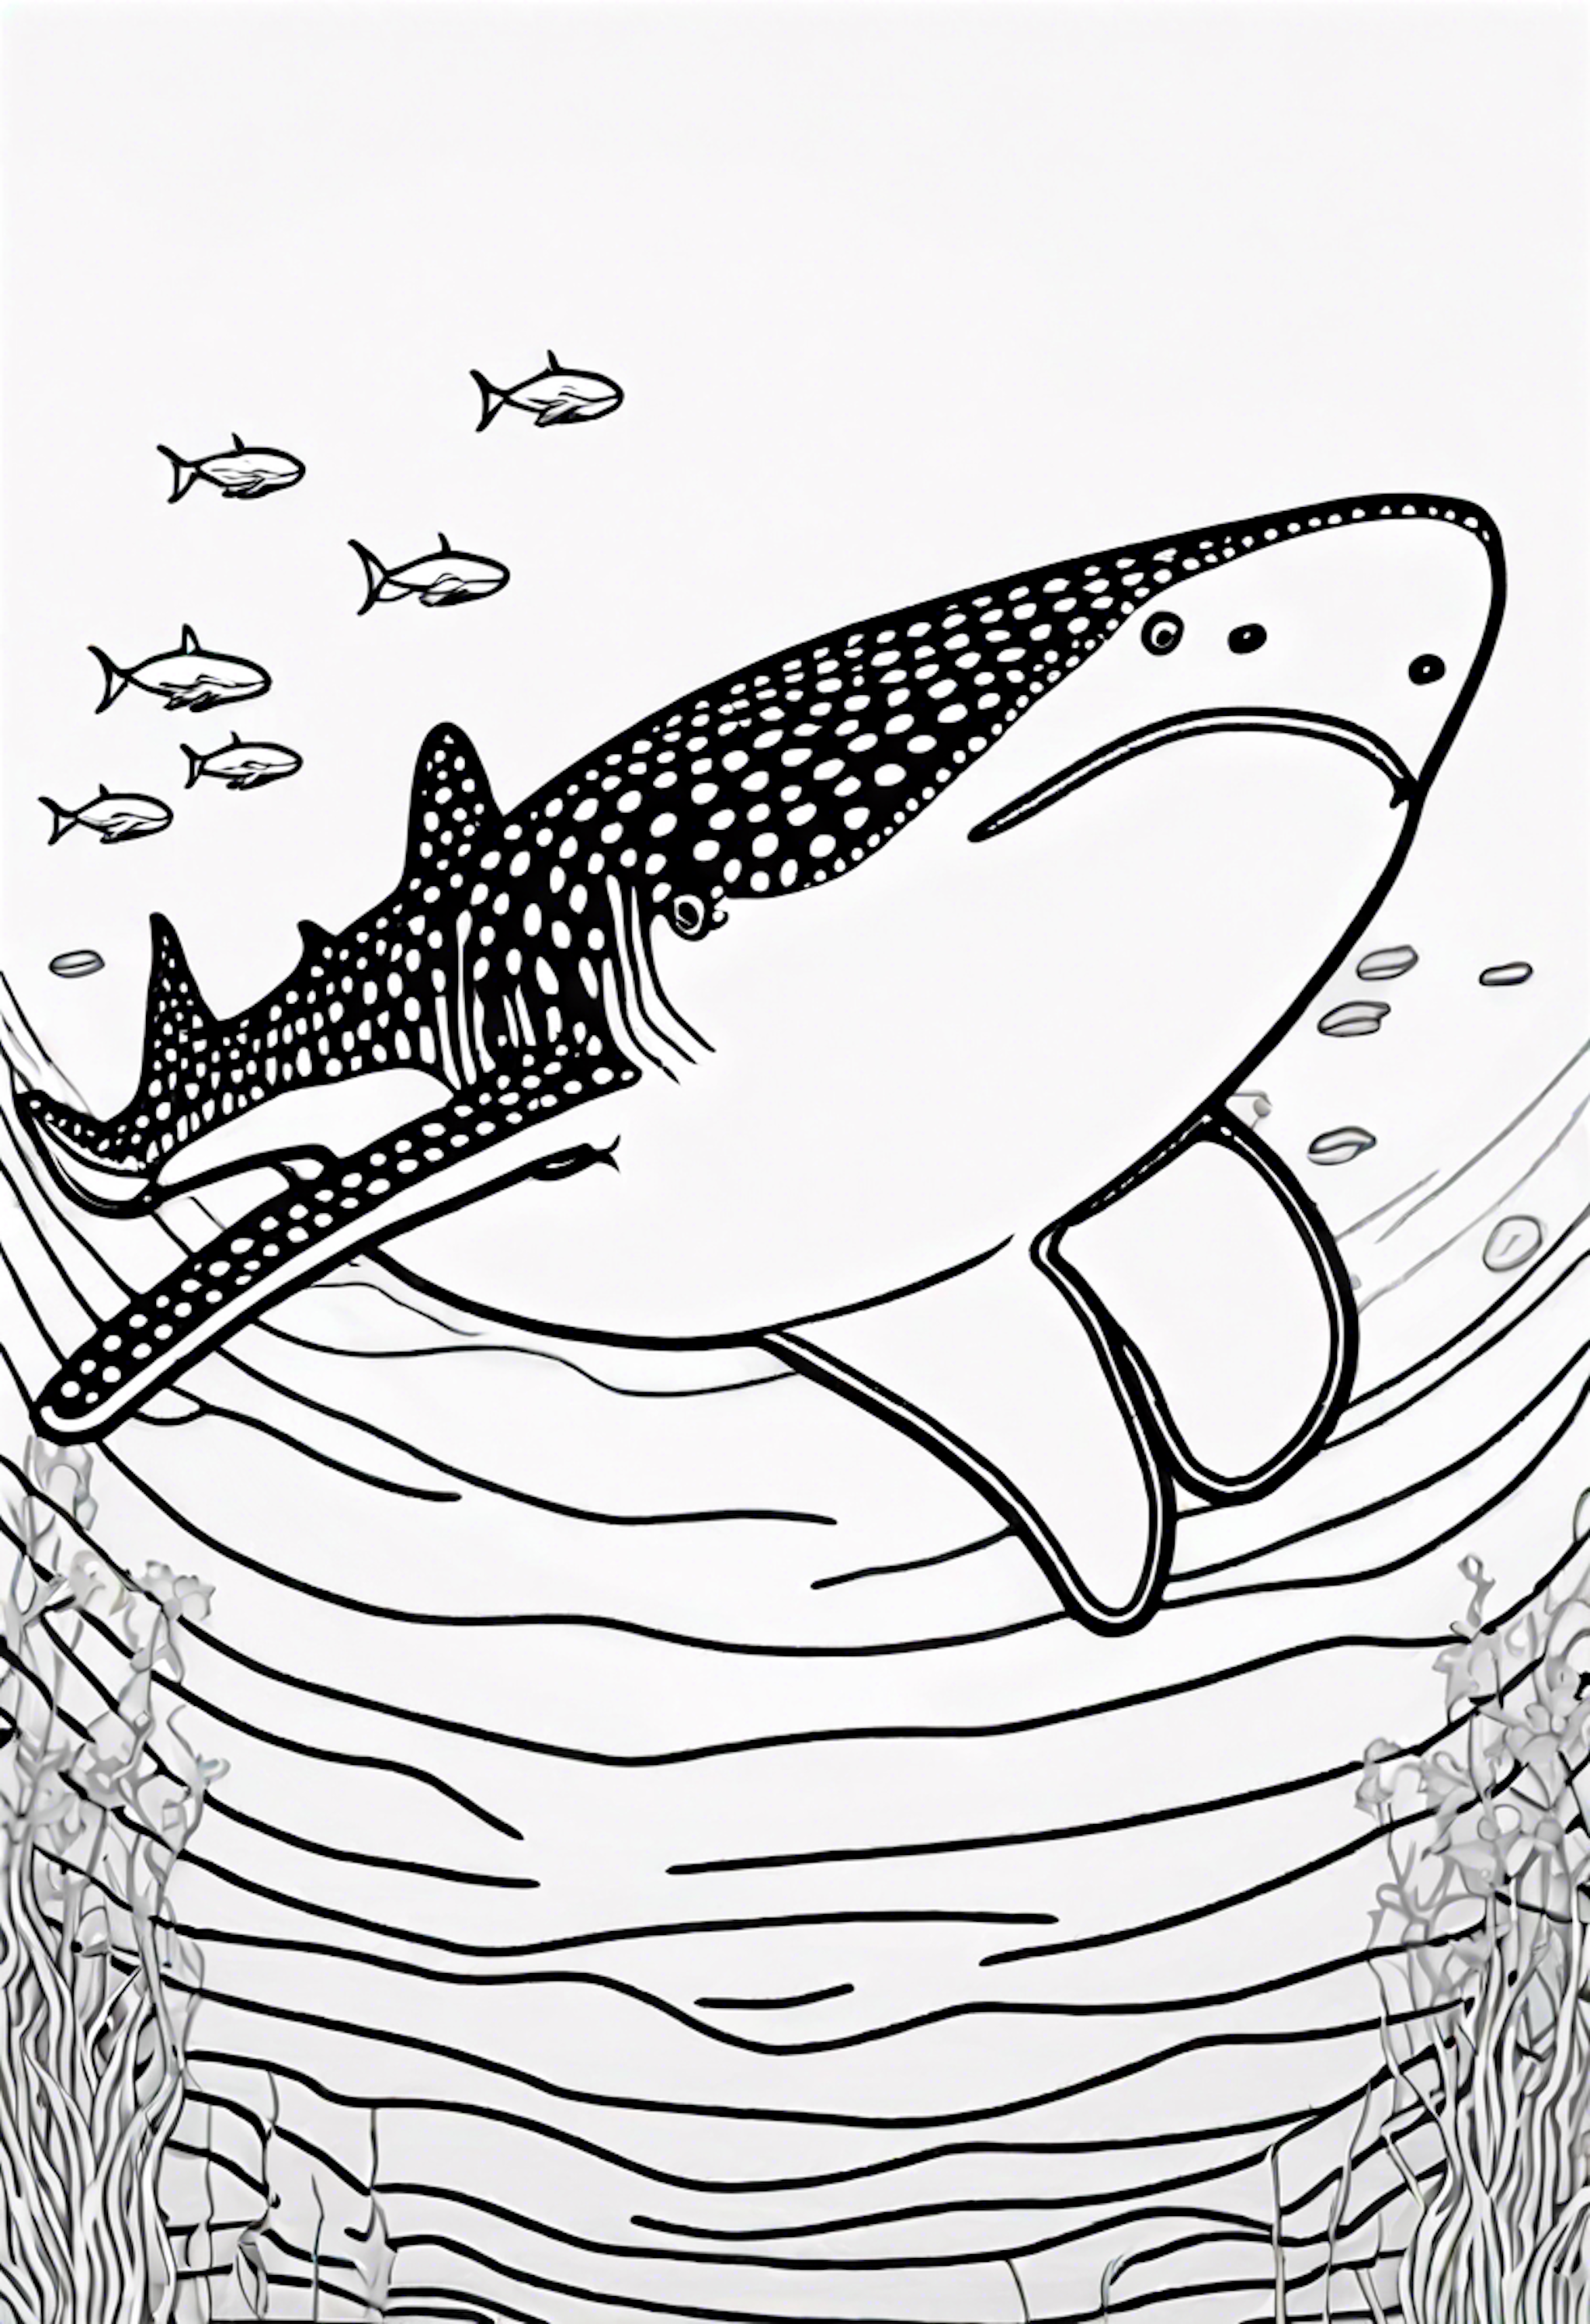 A coloring page for 54 Shark coloring pages